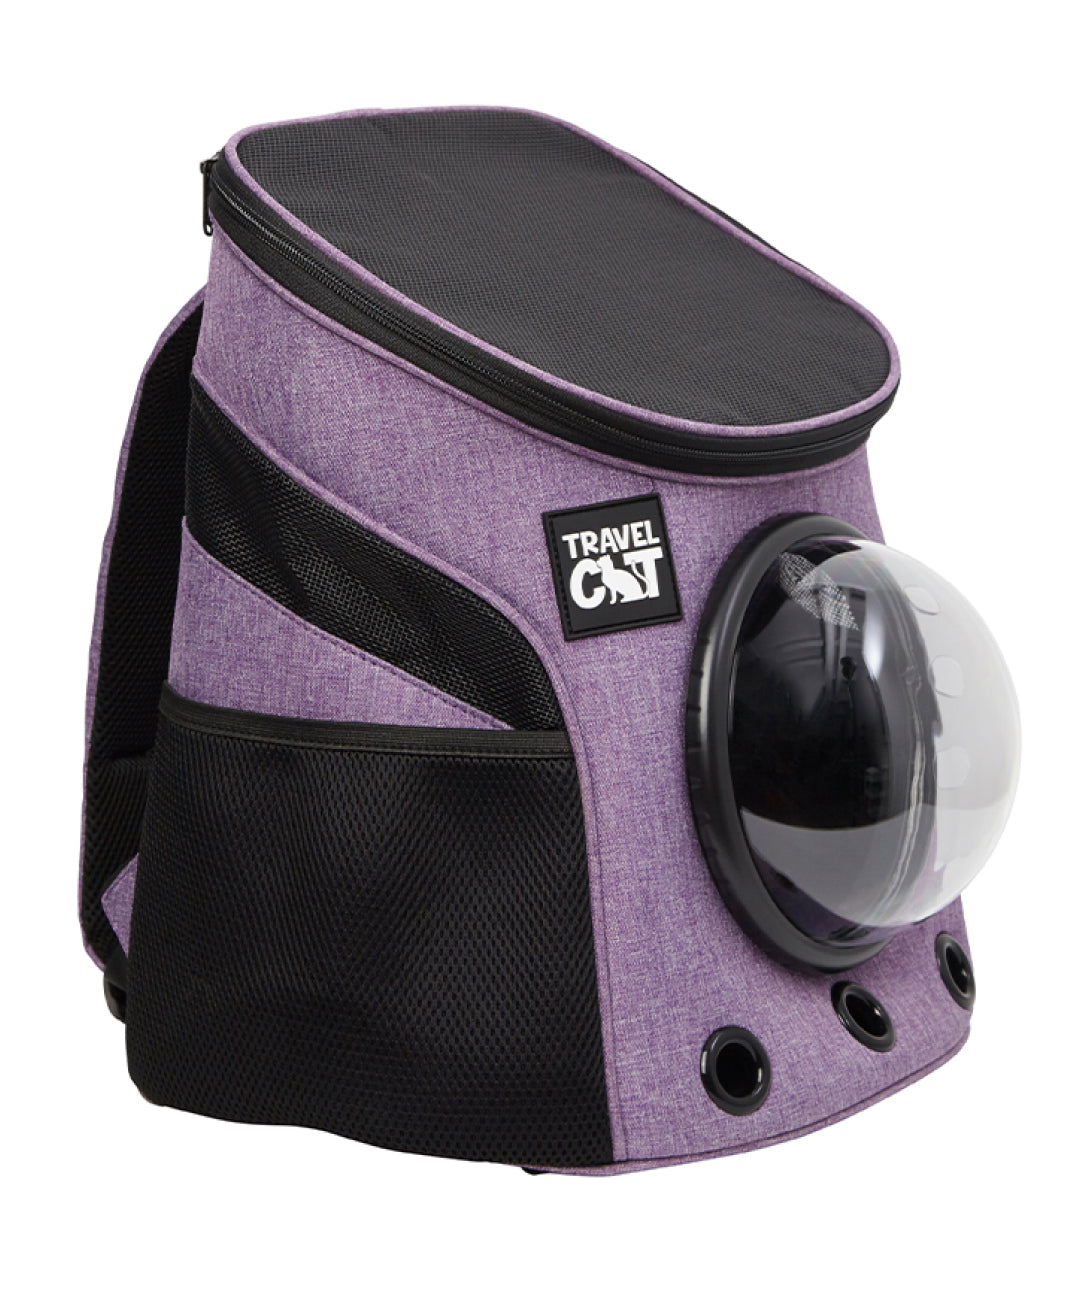 Dog Backpack / Small Dog Accessories / Cats Backpack / Puppy 